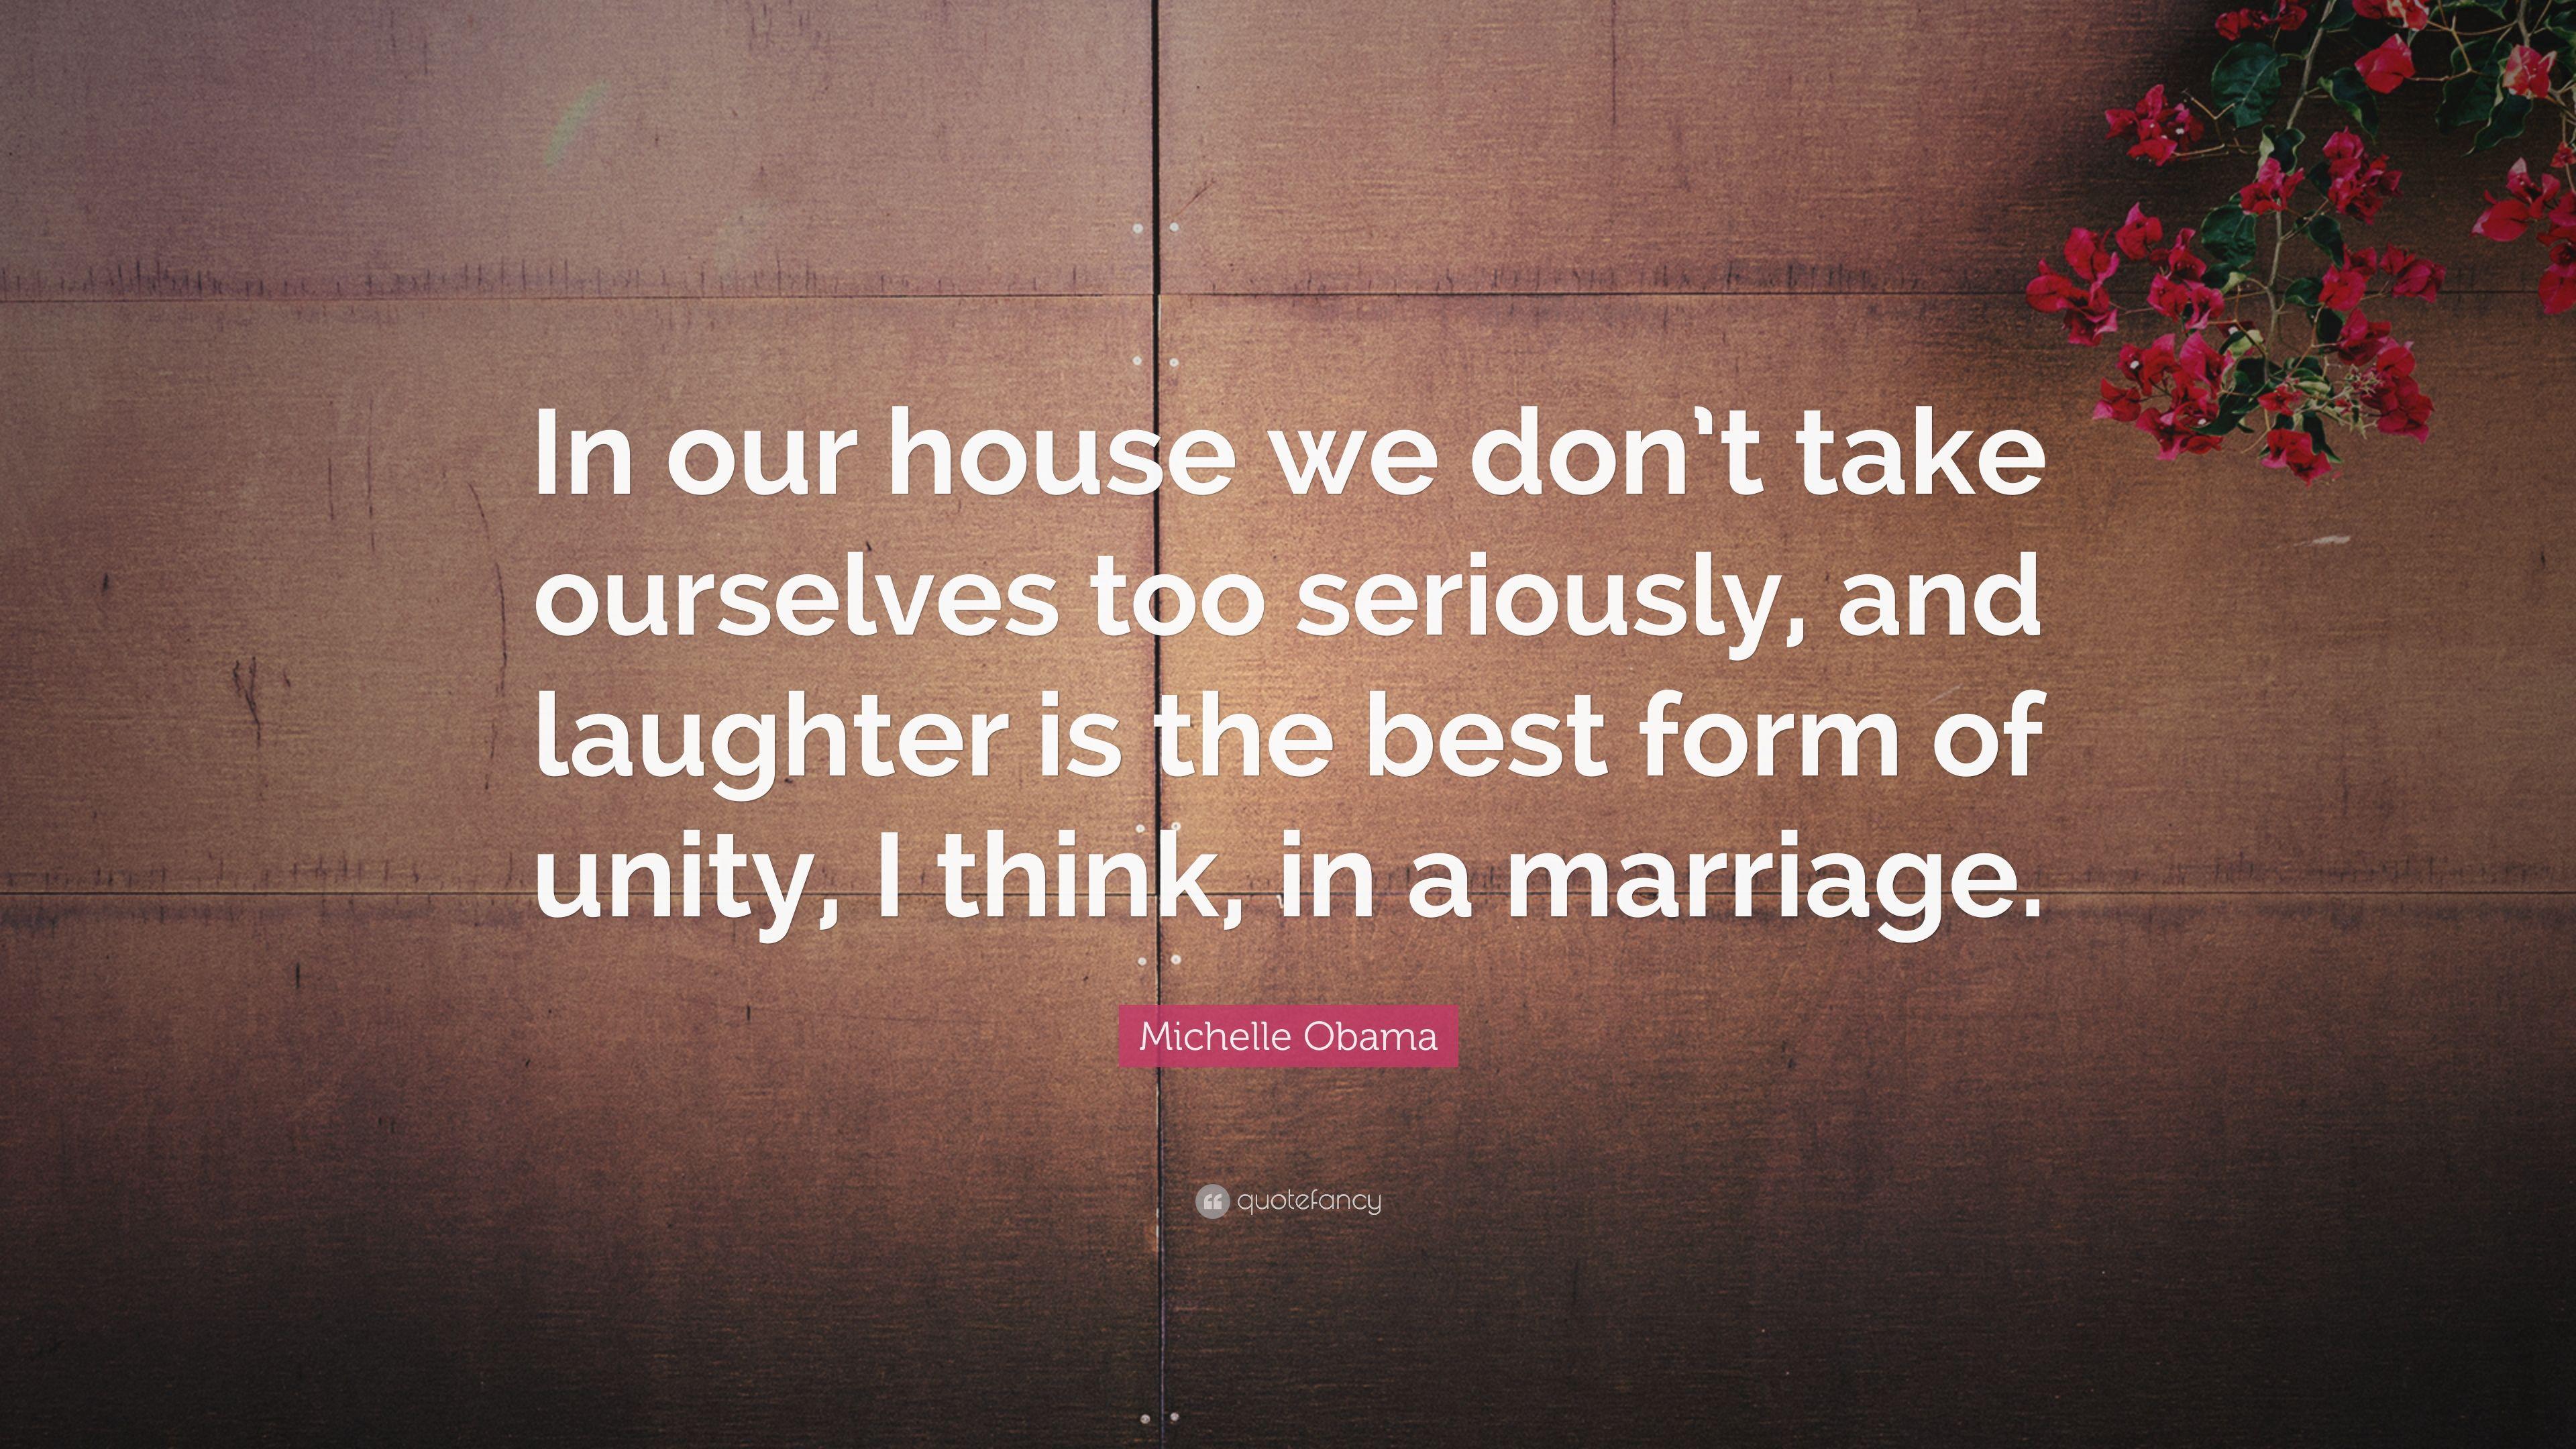 Michelle Obama Quote: “In our house we don&;t take ourselves too